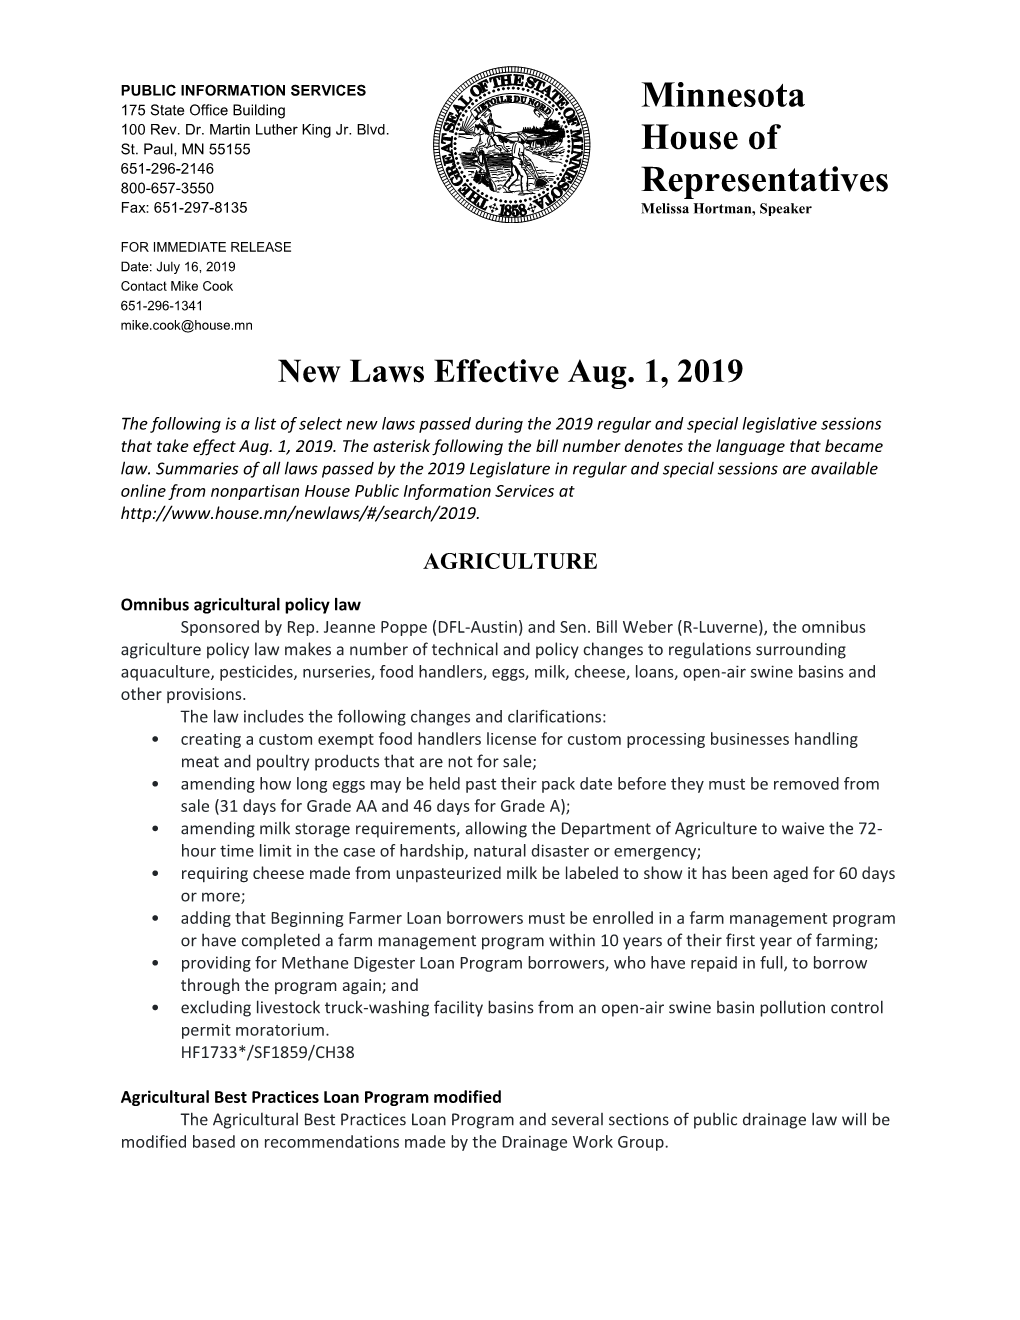 July 1, 2019 New Laws